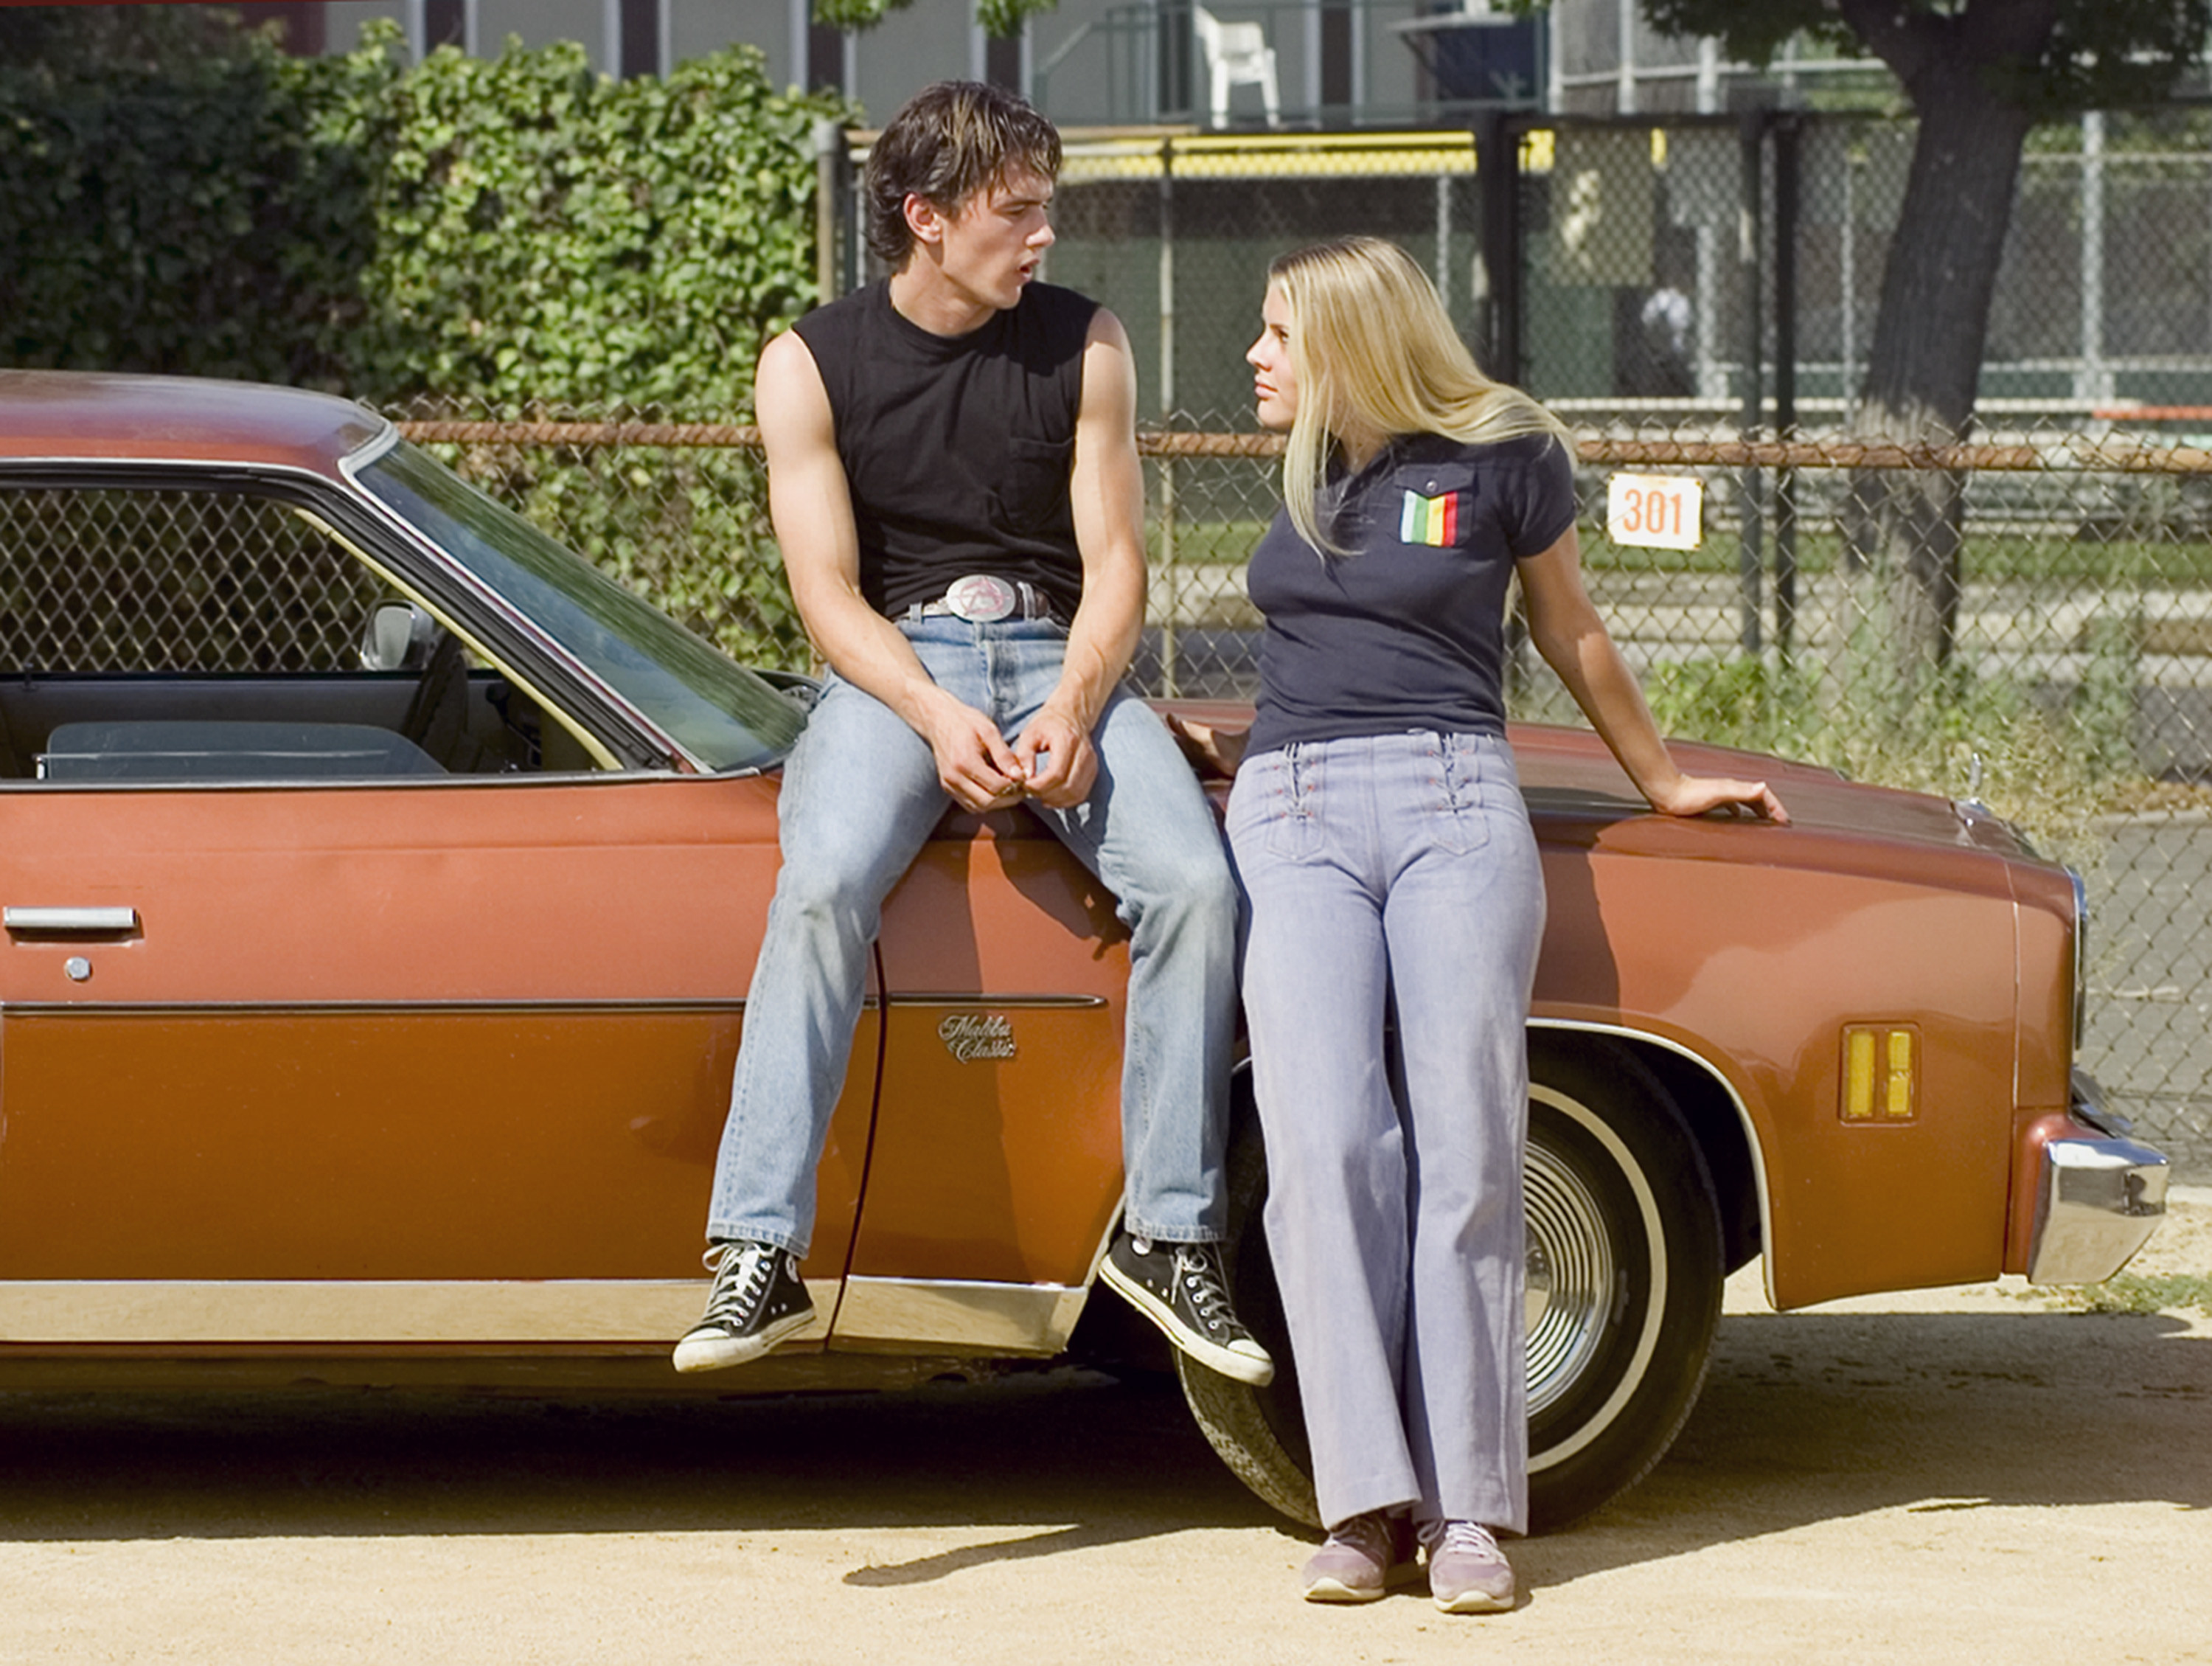 James Franco as Daniel Desario, Busy Philipps as Kim Kelly in &quot;Freaks and Geeks&quot;